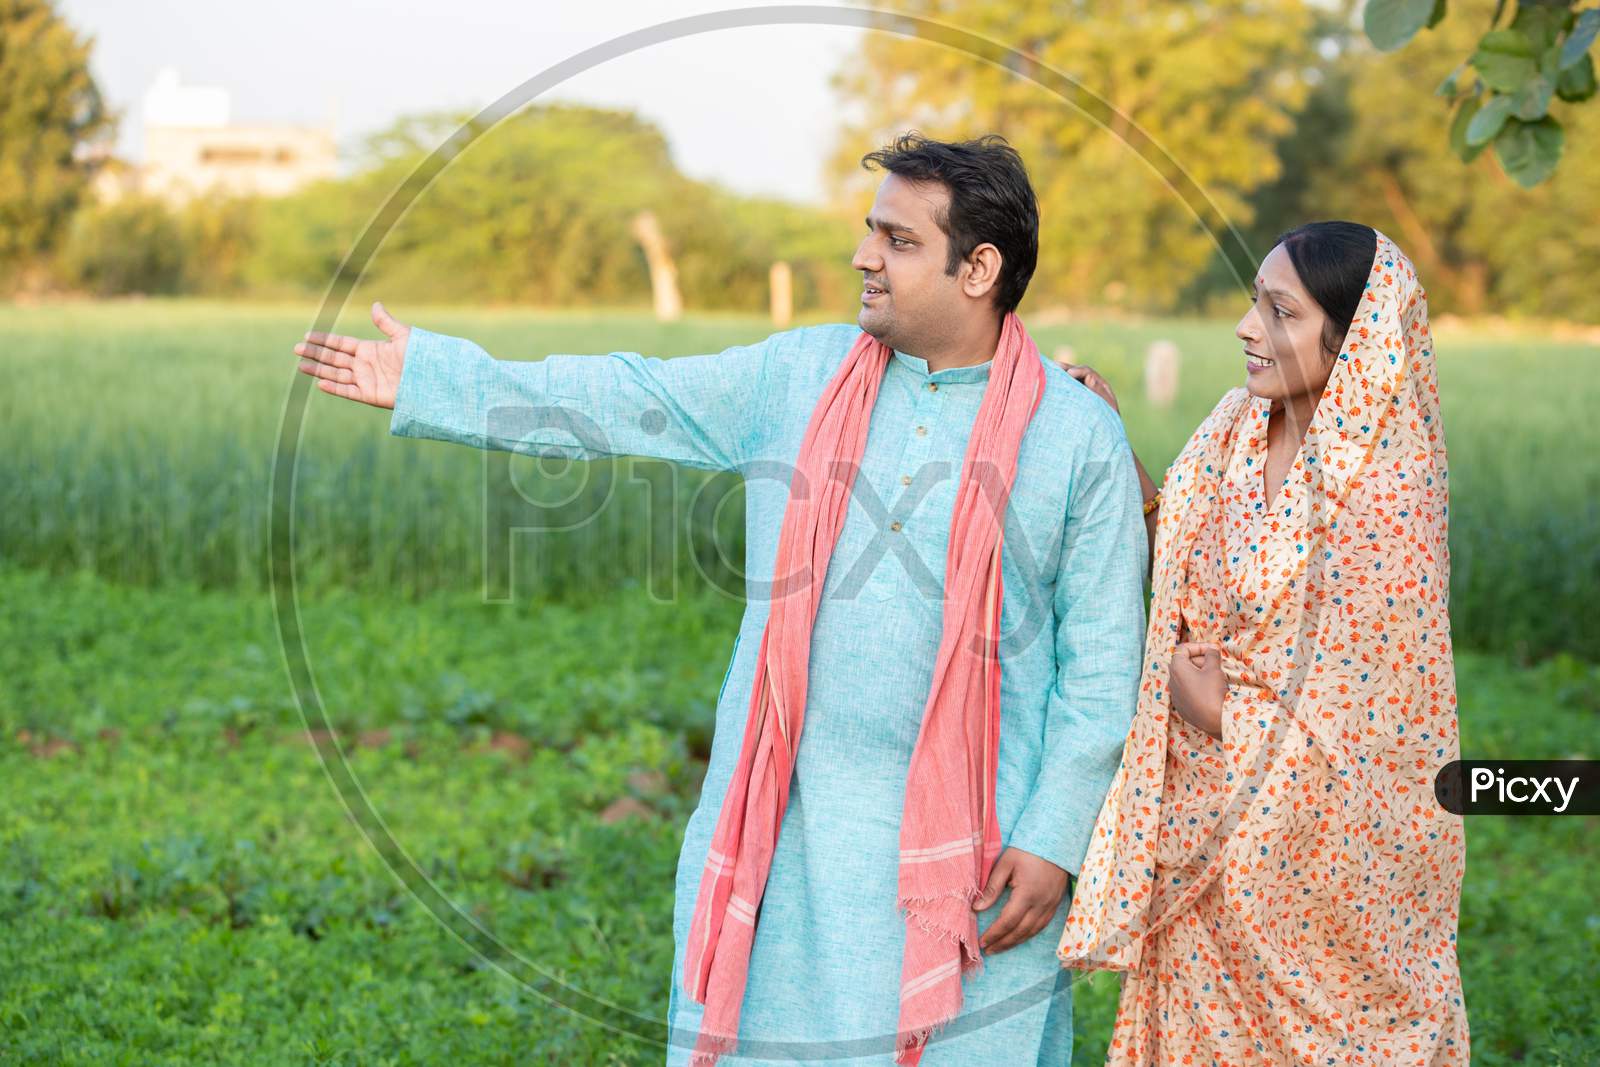 Happy Young Indian Rural Farmer Couple In Agricultural Field Looking At Each Other Laughing. Copy Space To Write Text. Man Wearing Kurta And Woman Wearing Saree,